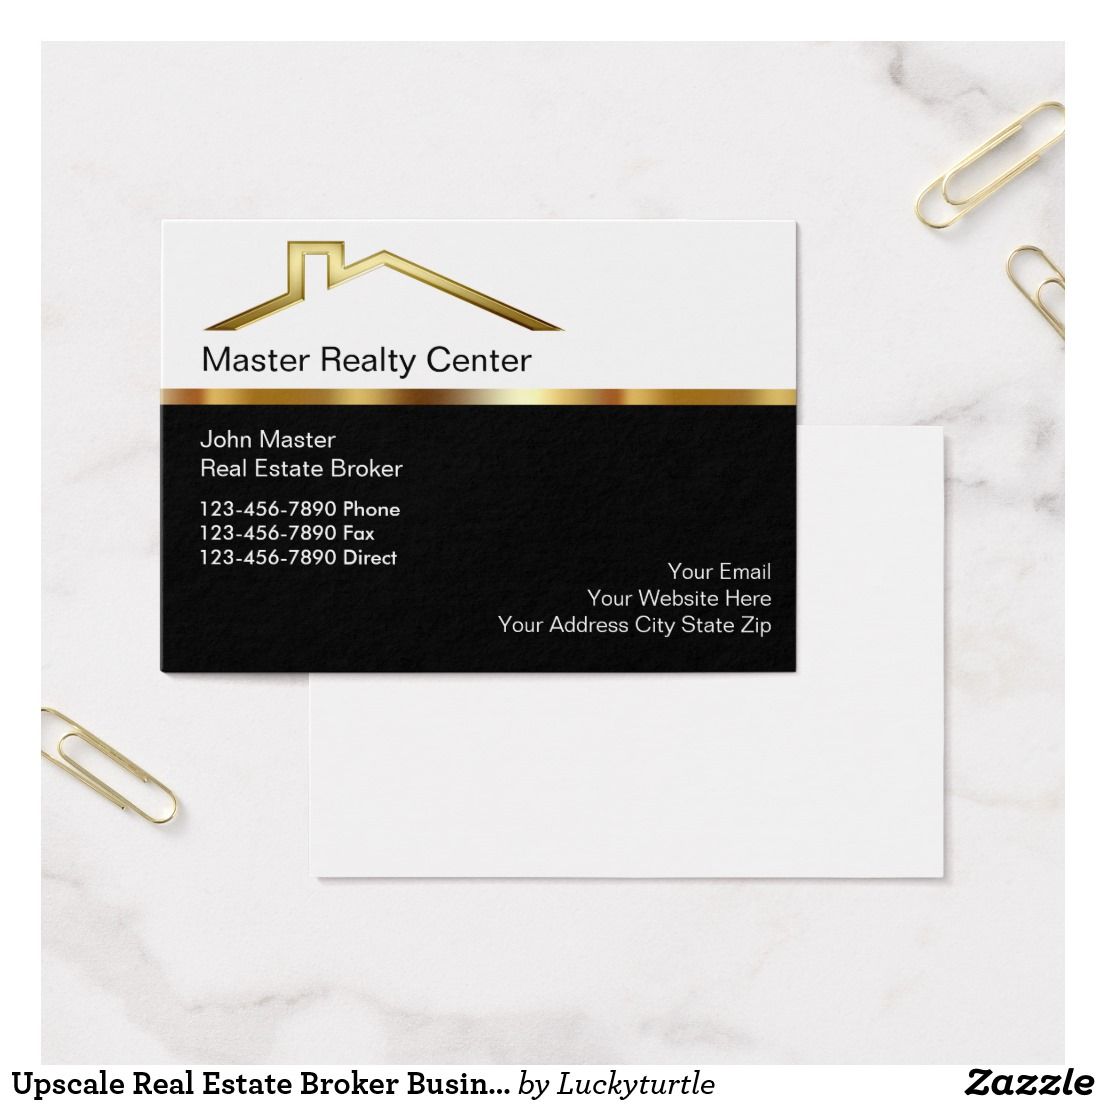 upscale business cards 4